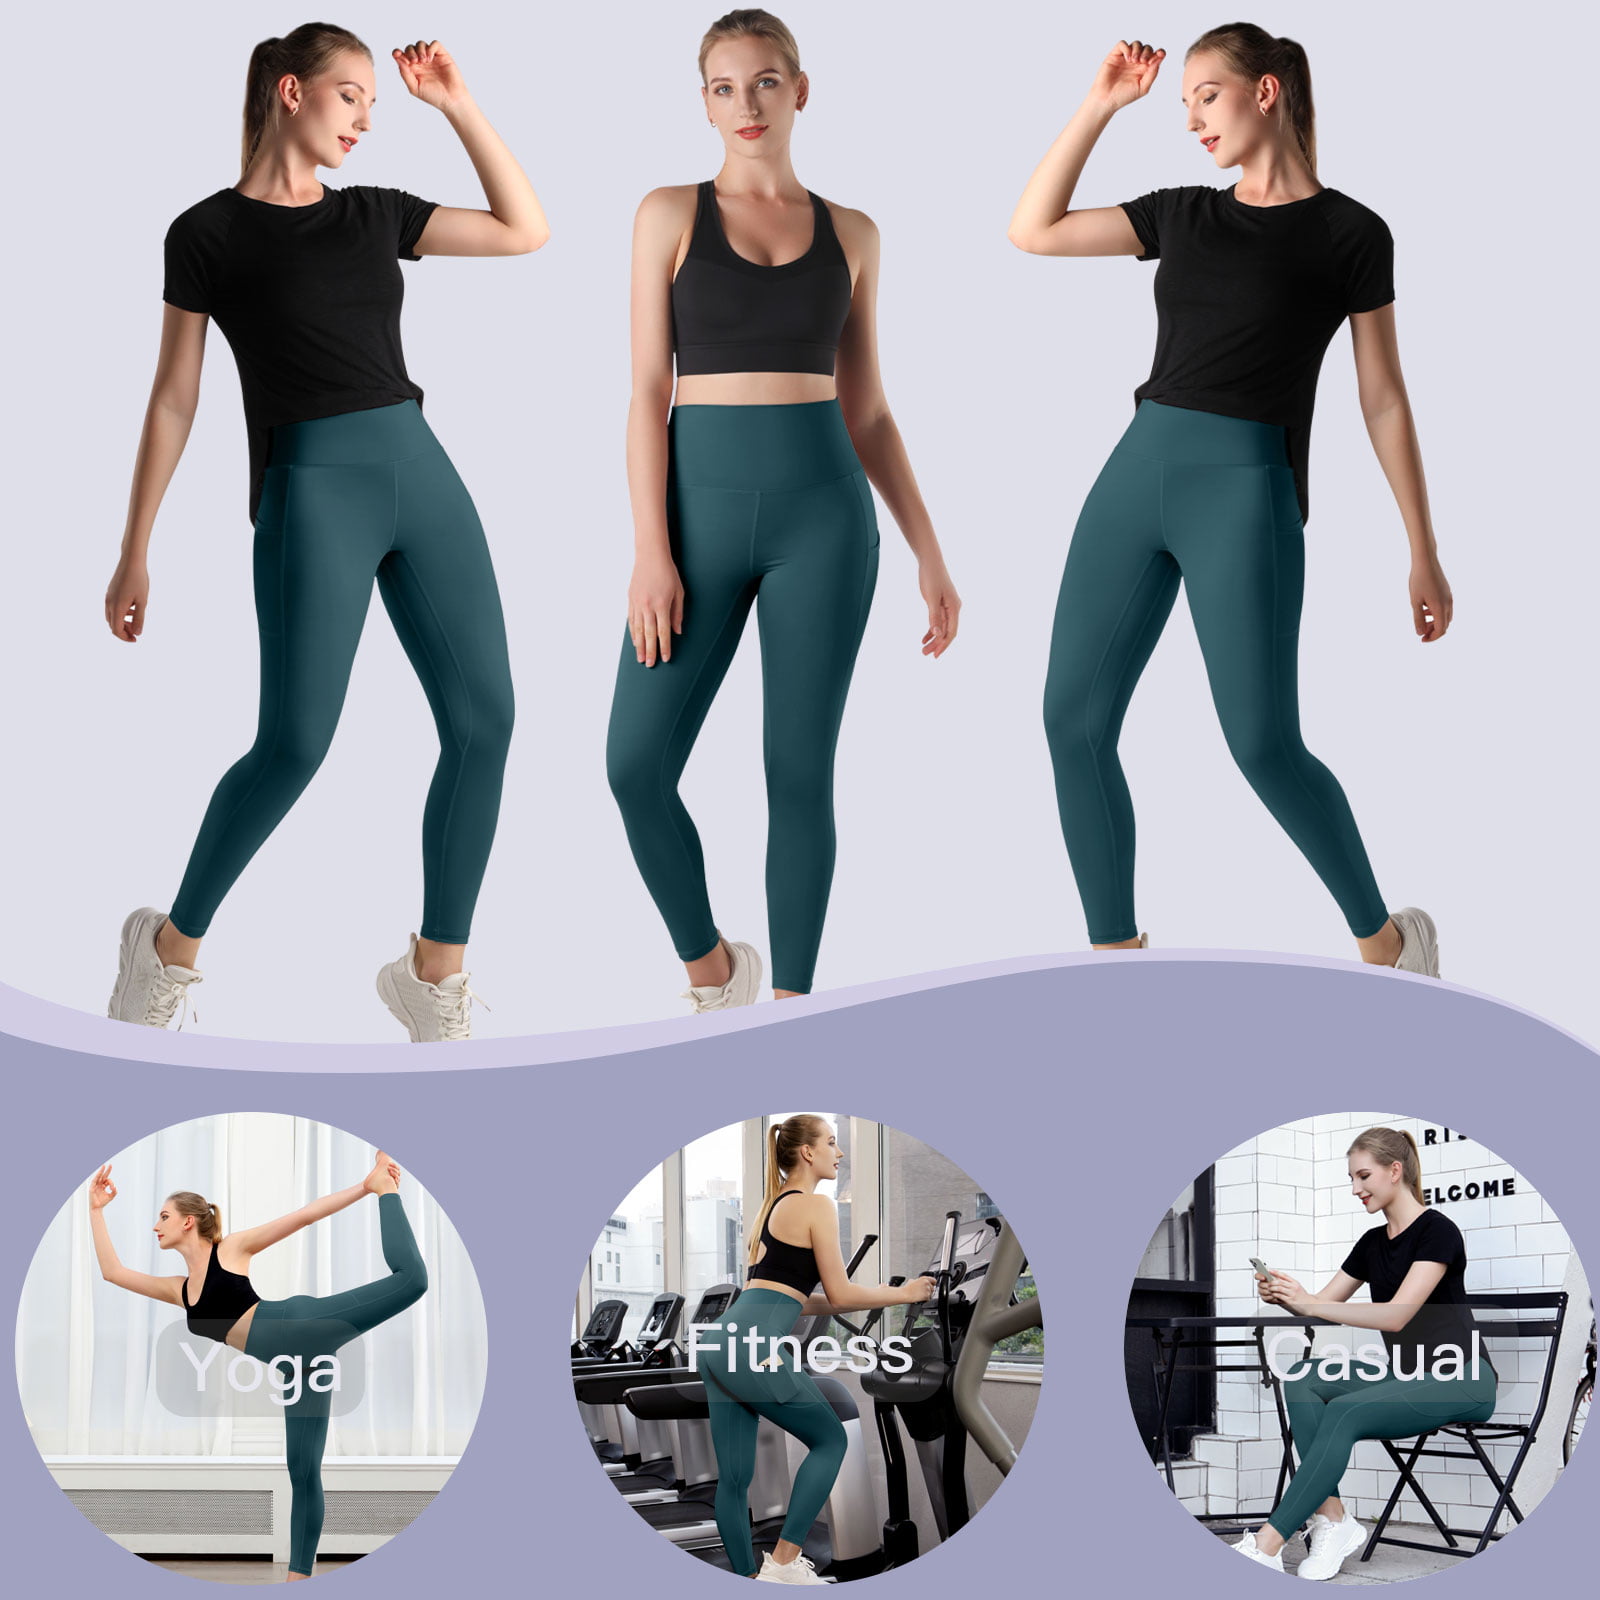 Soft Leggings For Women LLu2 High Waisted Tummy Control No See Through  Workout Yoga Pants Sports Leggings J7TY From Dhn66fdm0, $8.75